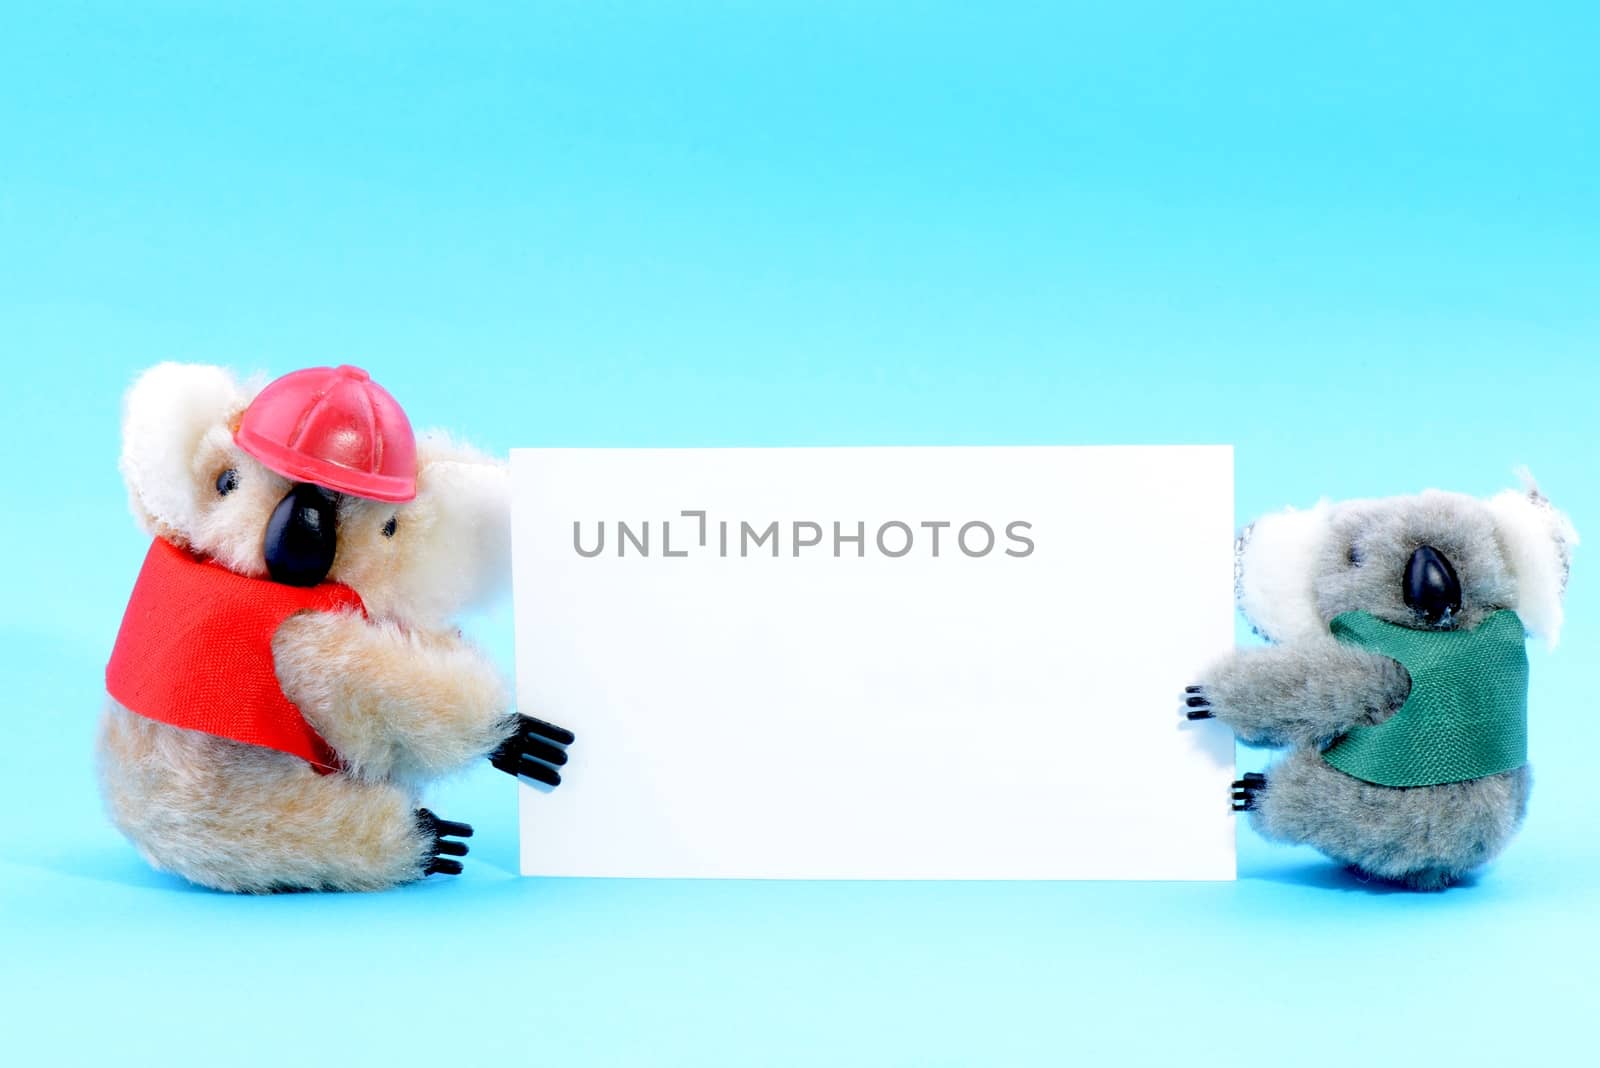 Two toy koala holding a blank white card on a blue background